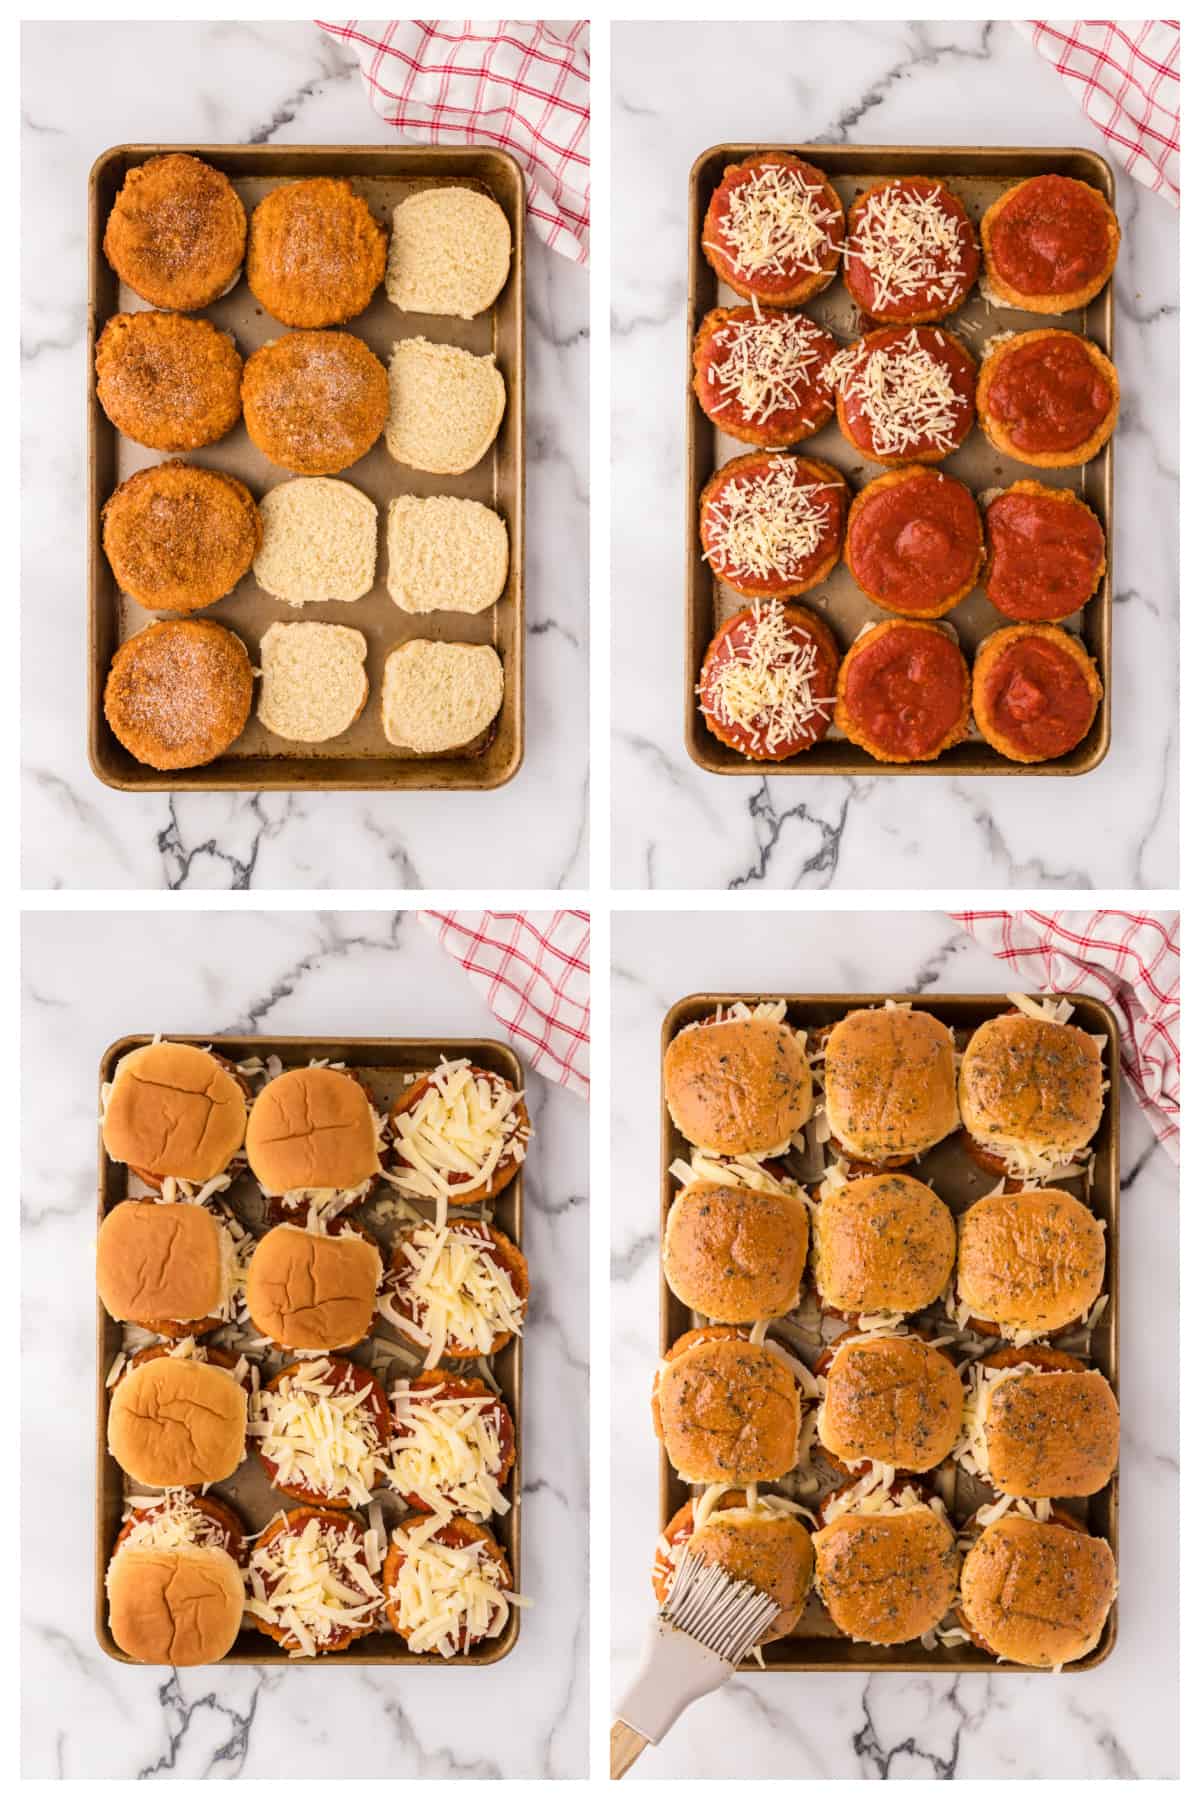 Collage showing how to make chicken parmesan sliders.